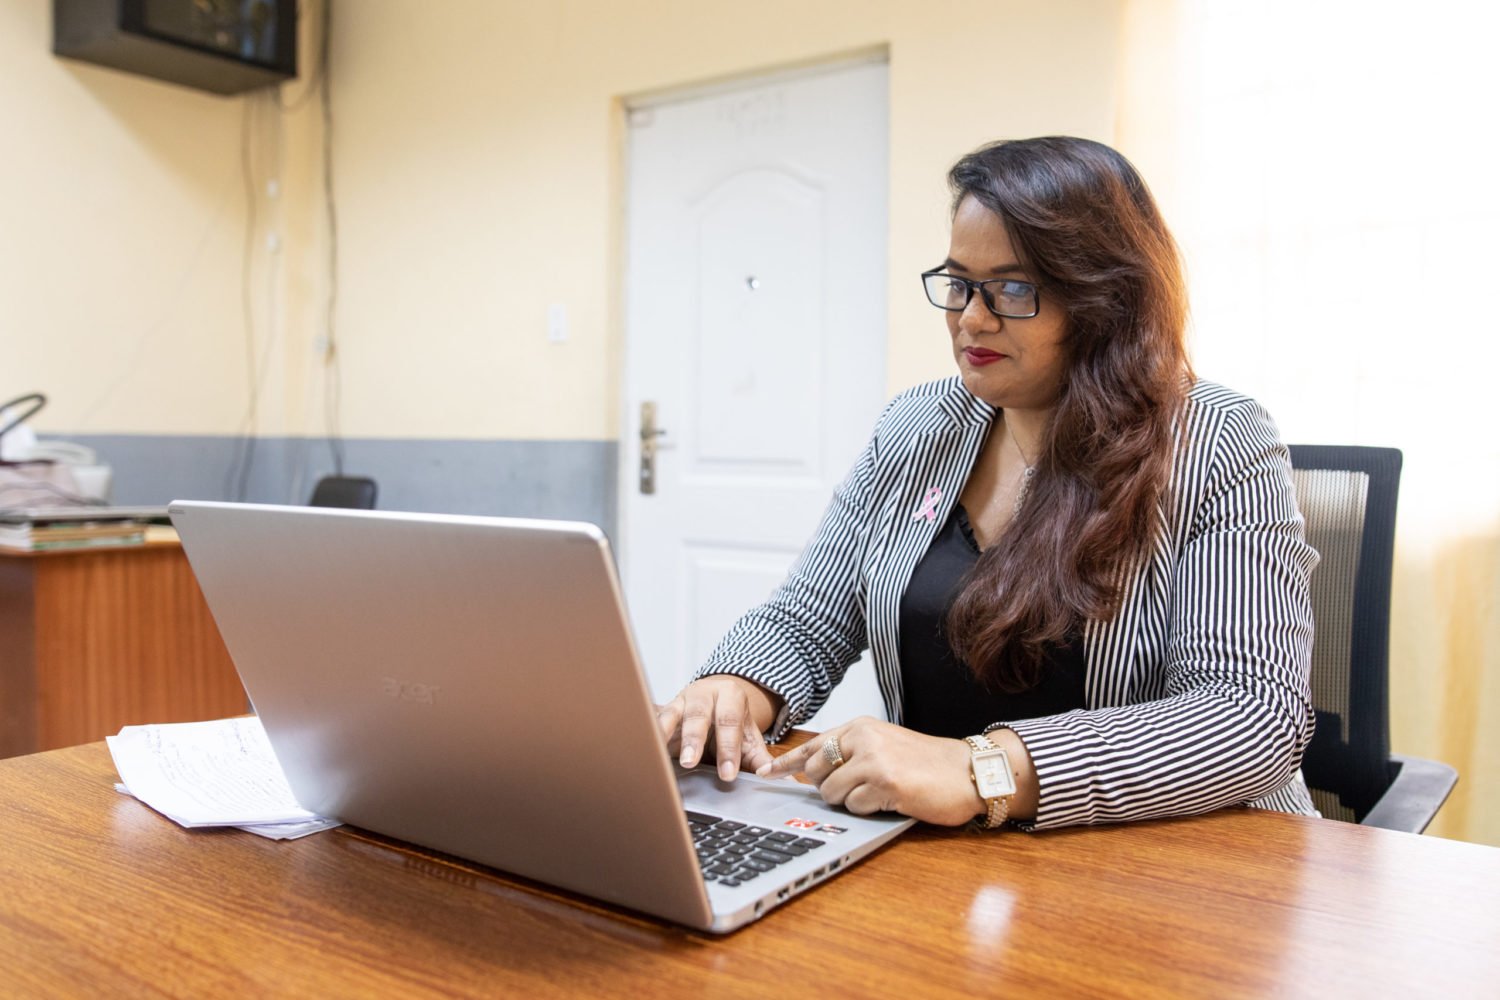 Camille Deokie, a user of the HerVenture app, works on her computer in her office in Georgetown, Guyana on 27 October 2022. The HerVenture app offers women entrepreneurs essential business training and support on the go, with one in 50 women in Guyana now users.